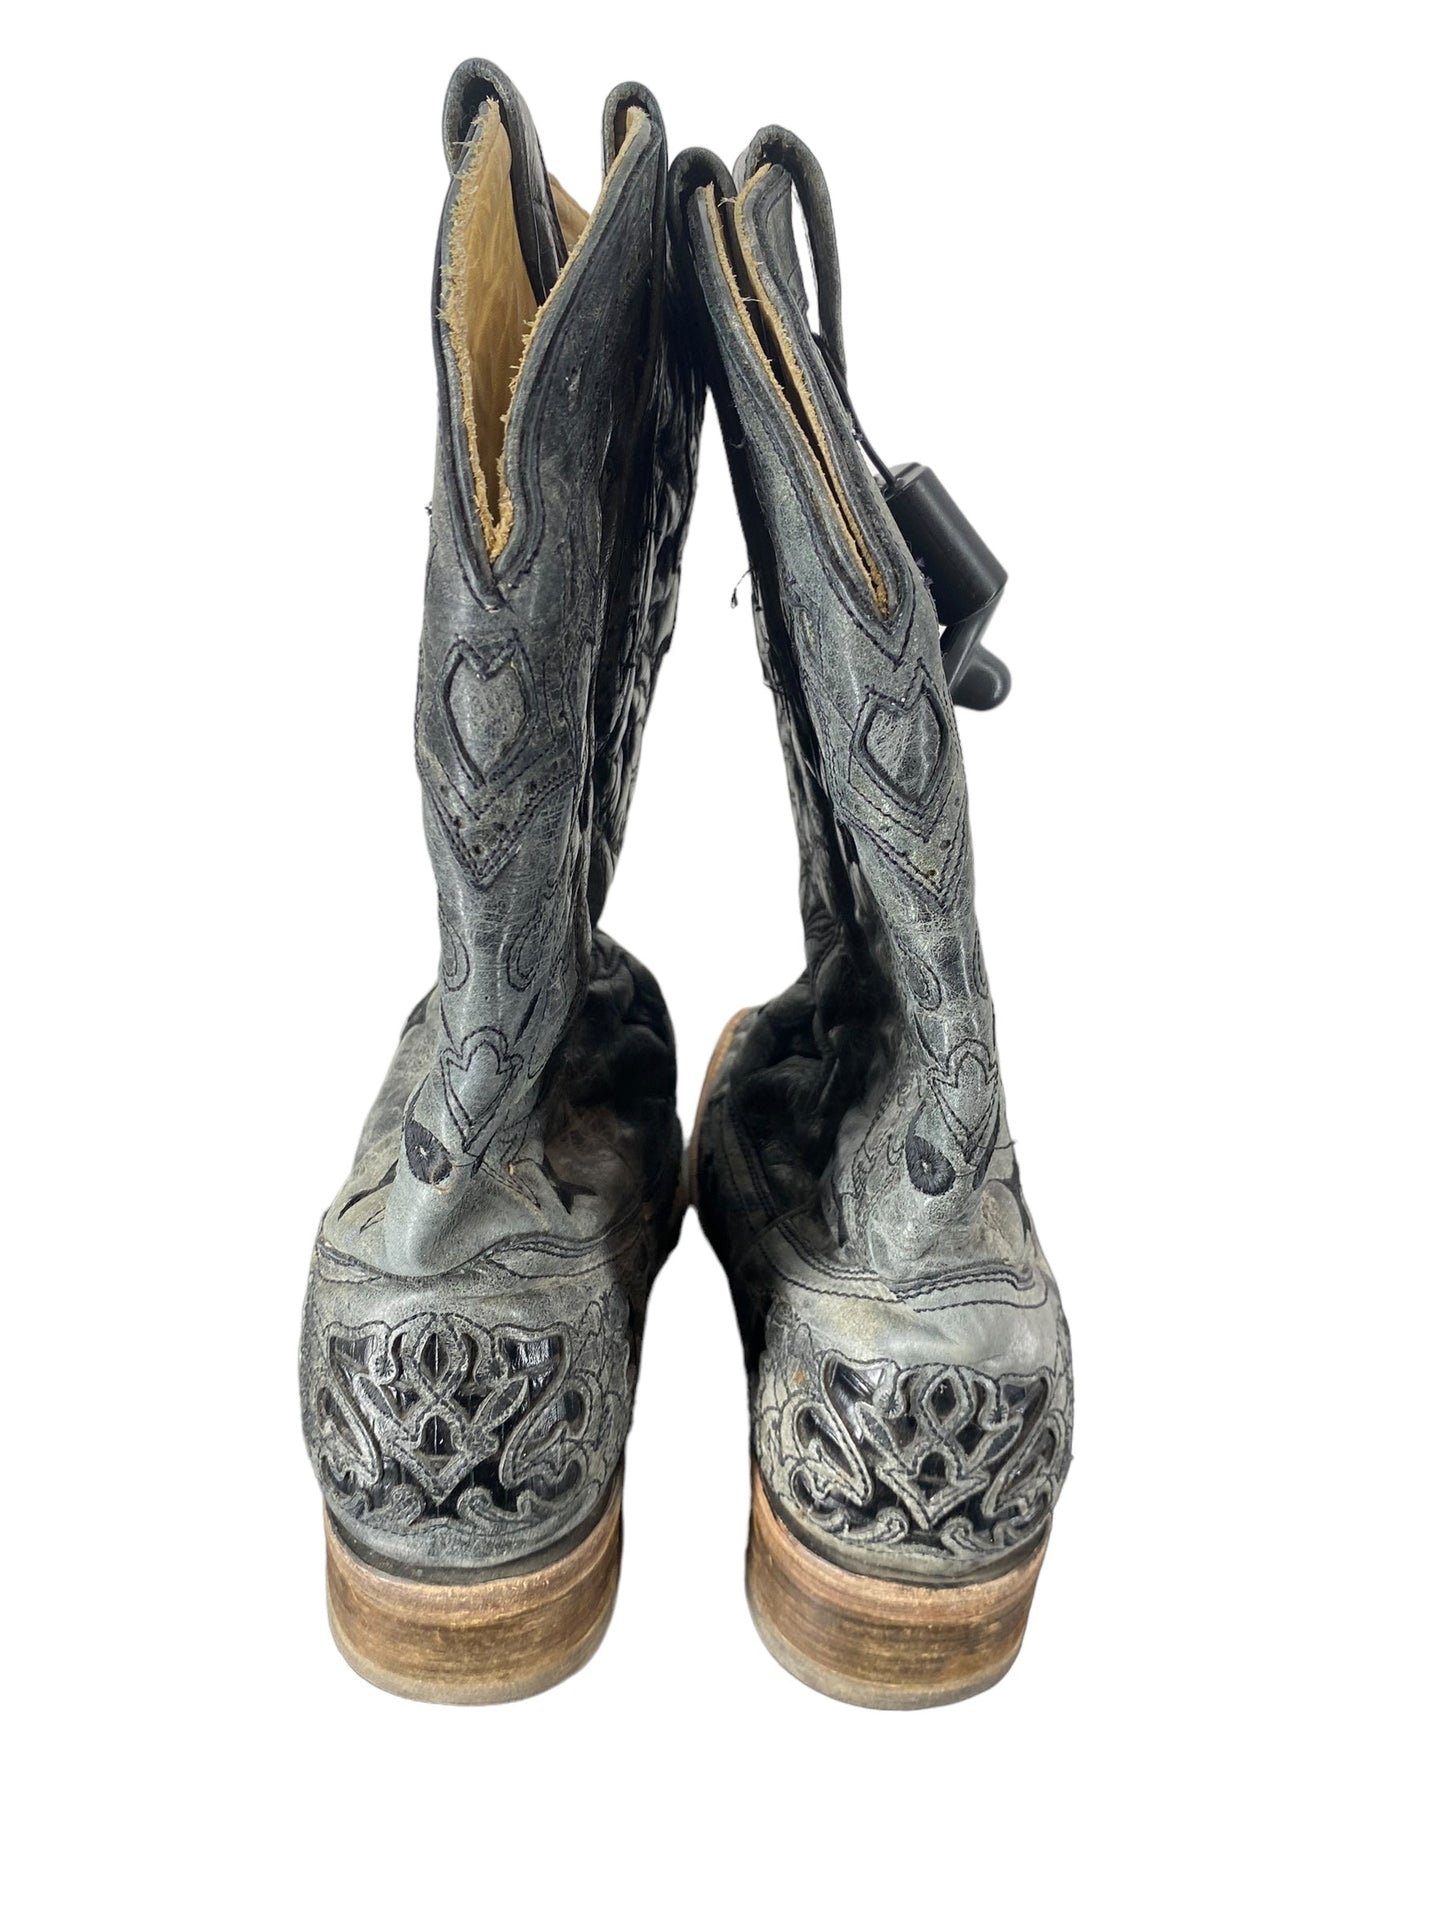 Black Boots Western Corral, Size 10